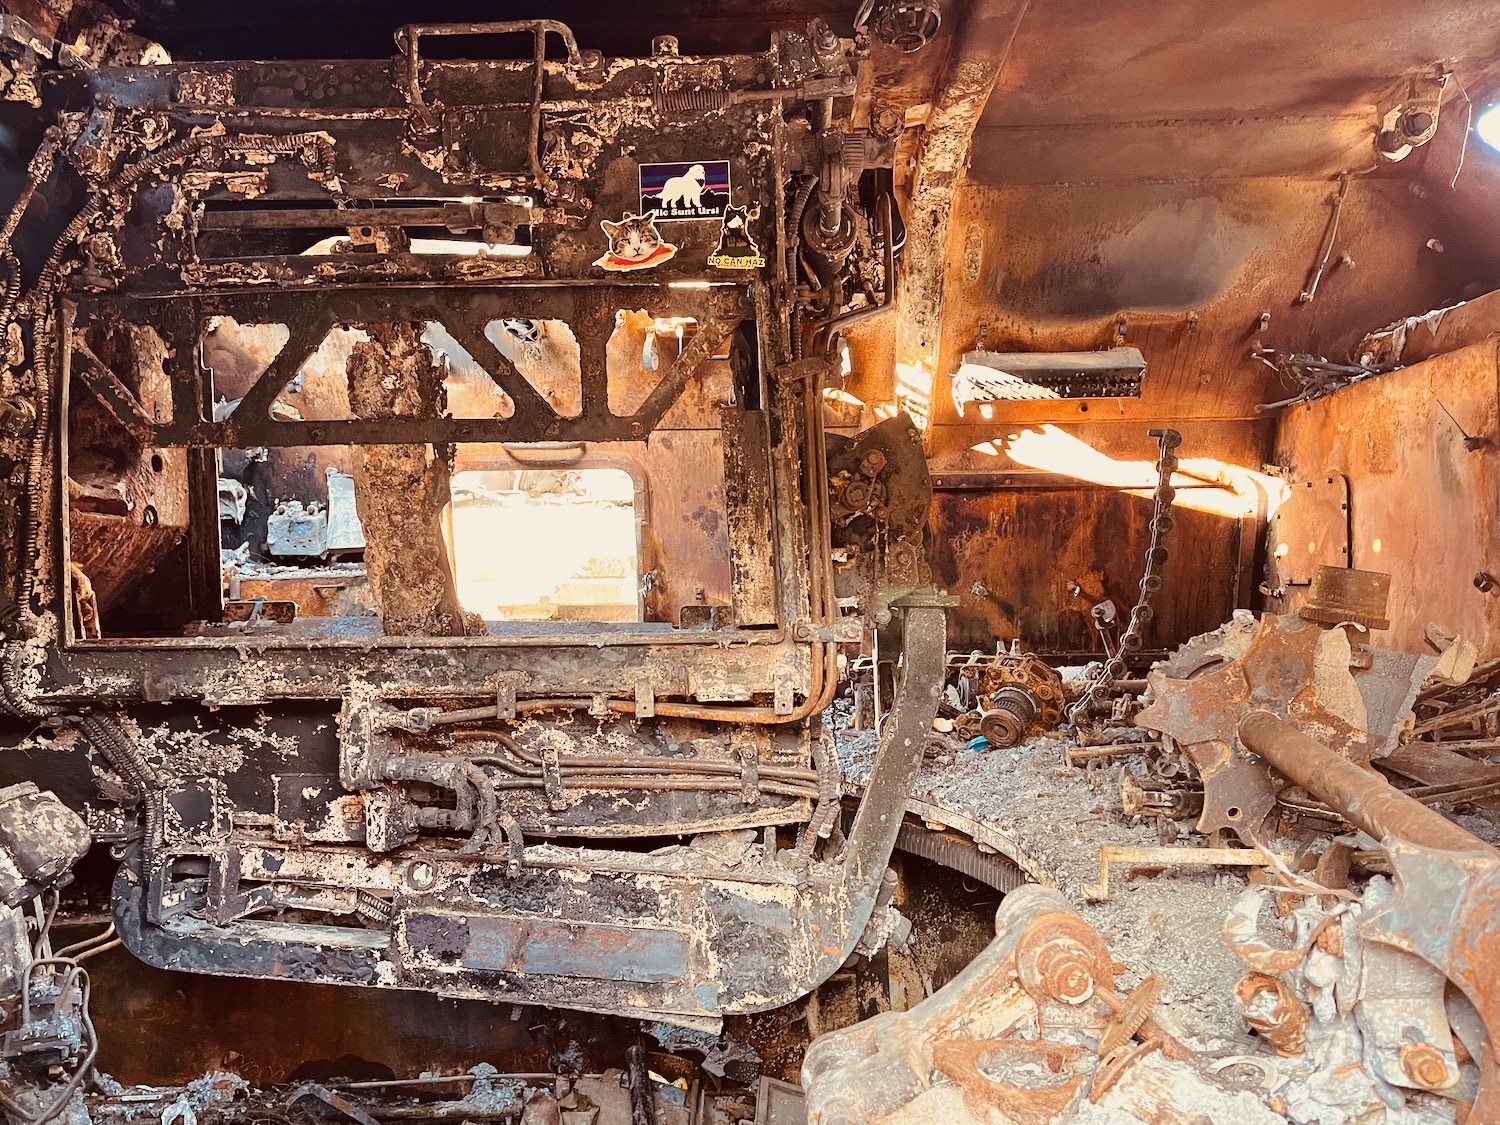 a burned out machine in a room